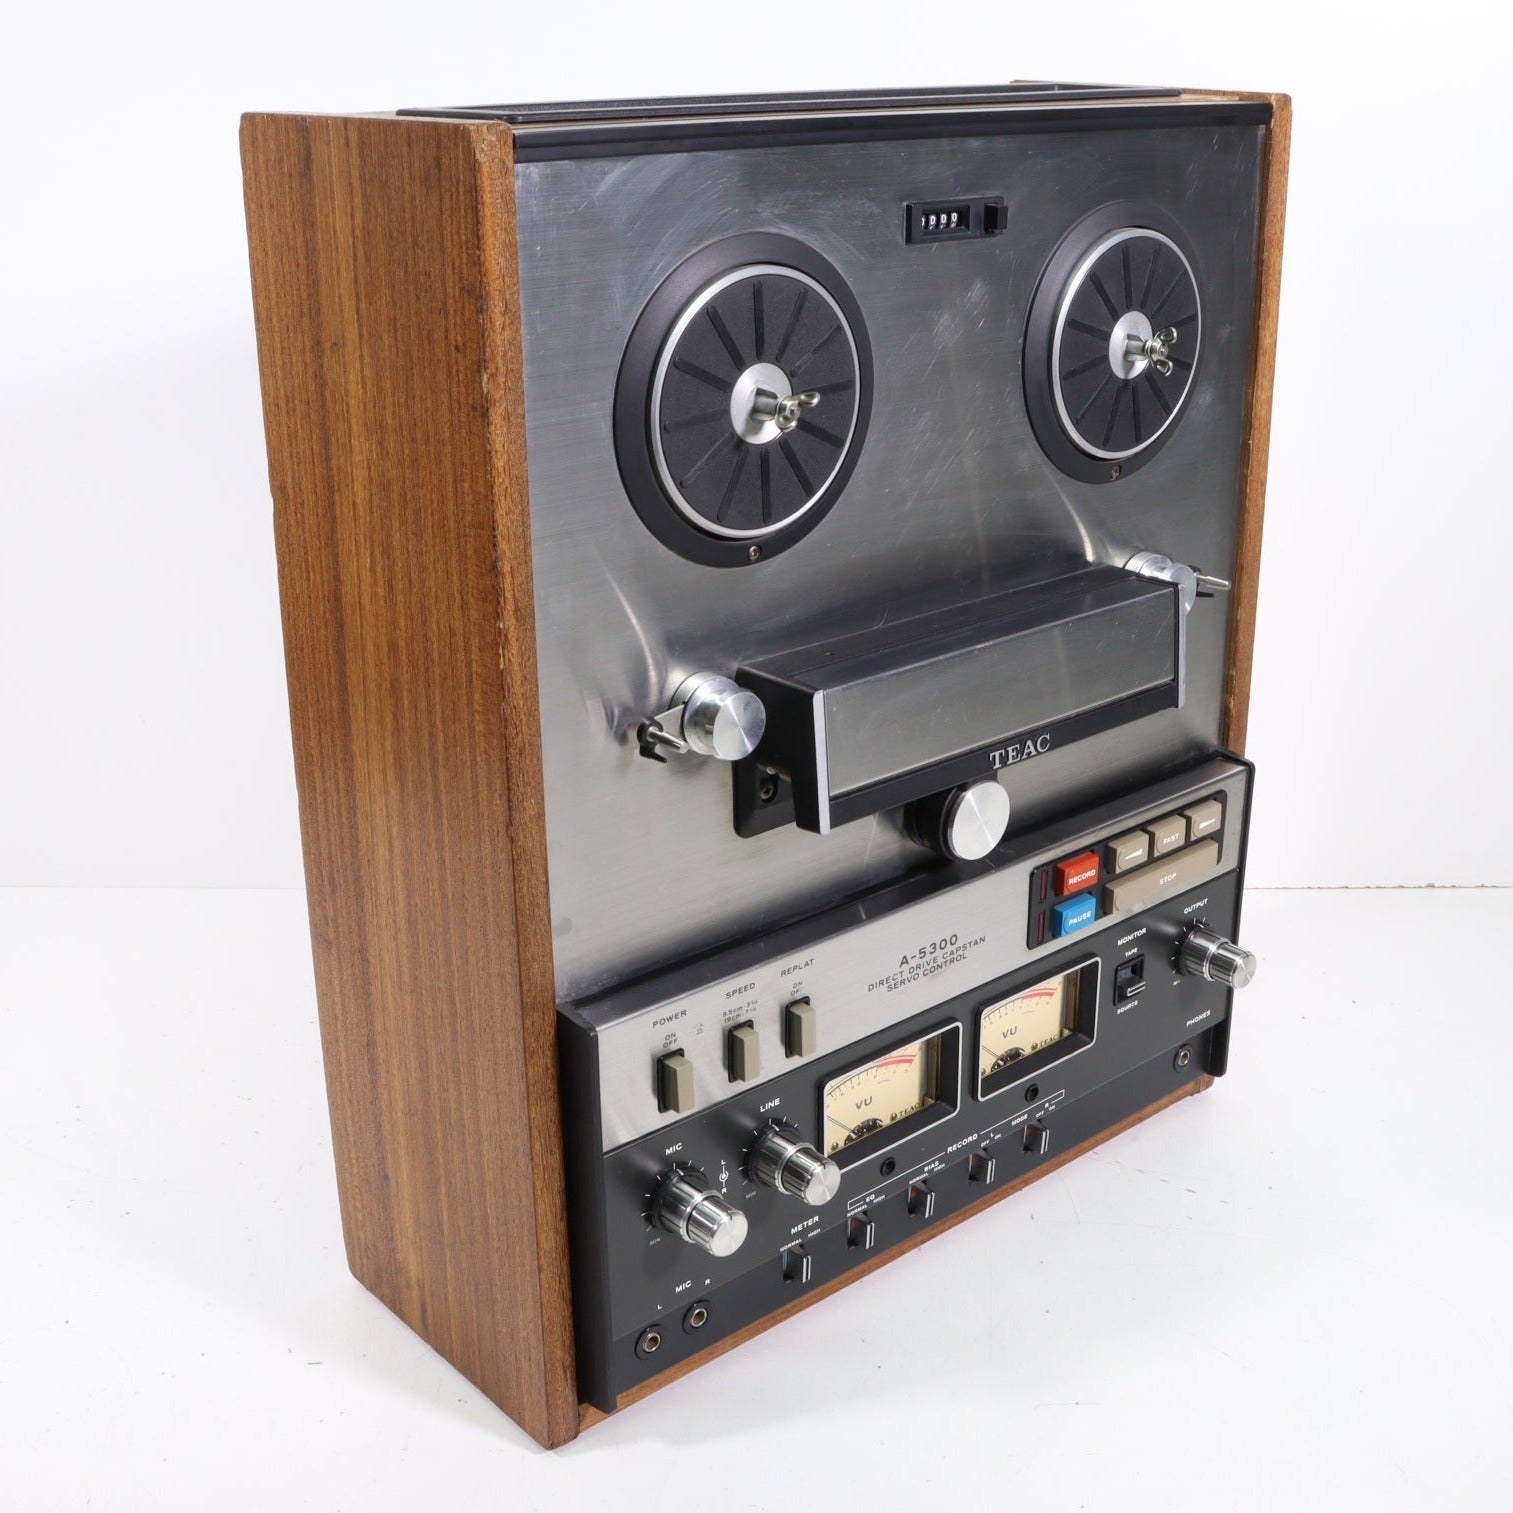 TEAC-3MKII(2) Reel to reel tape recorder, serviced Photo #4873388